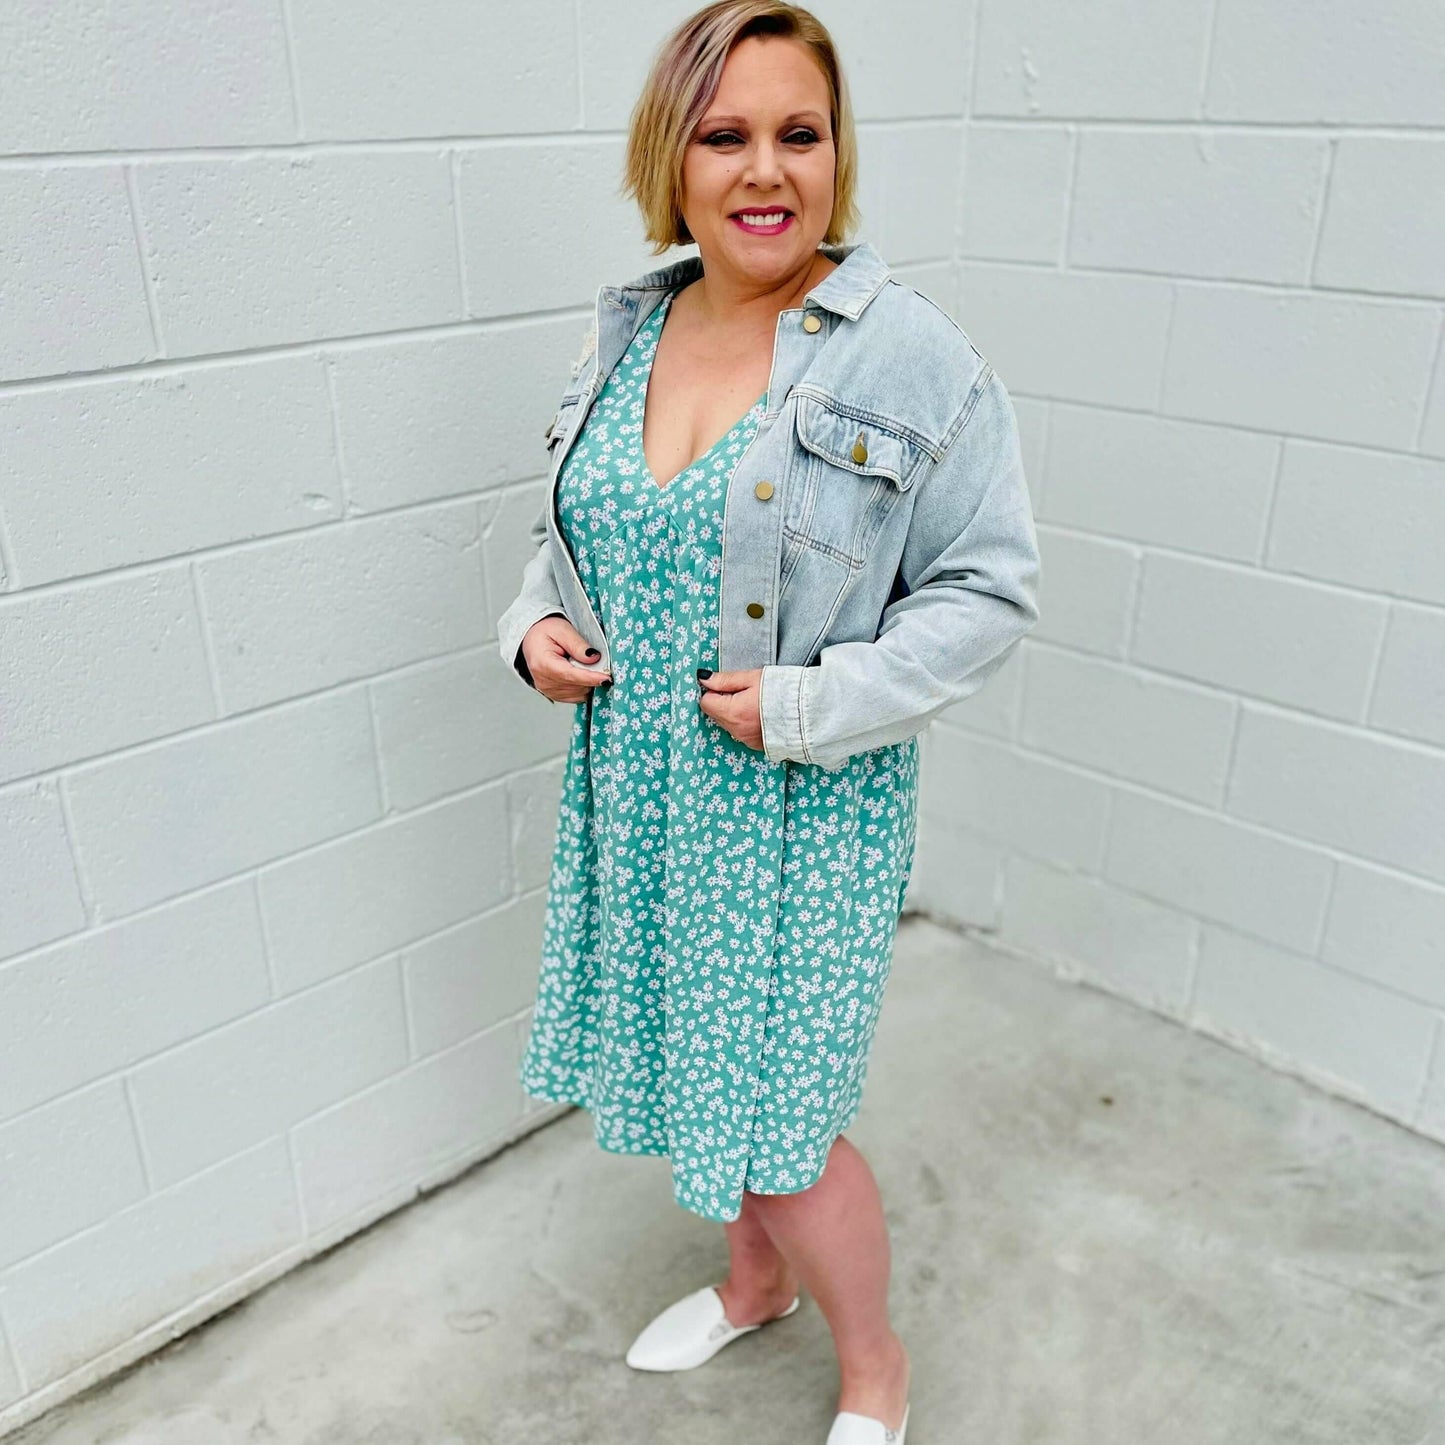 Who doesn't want a dress you can go out in and curl up in. Ummm I do. You girls need this dress and our white mules to pair with it. This whole outfit is so perfect! Baby daisy flowers adorn a blue-green background on this v-neck bell-sleeved supersoft dress.